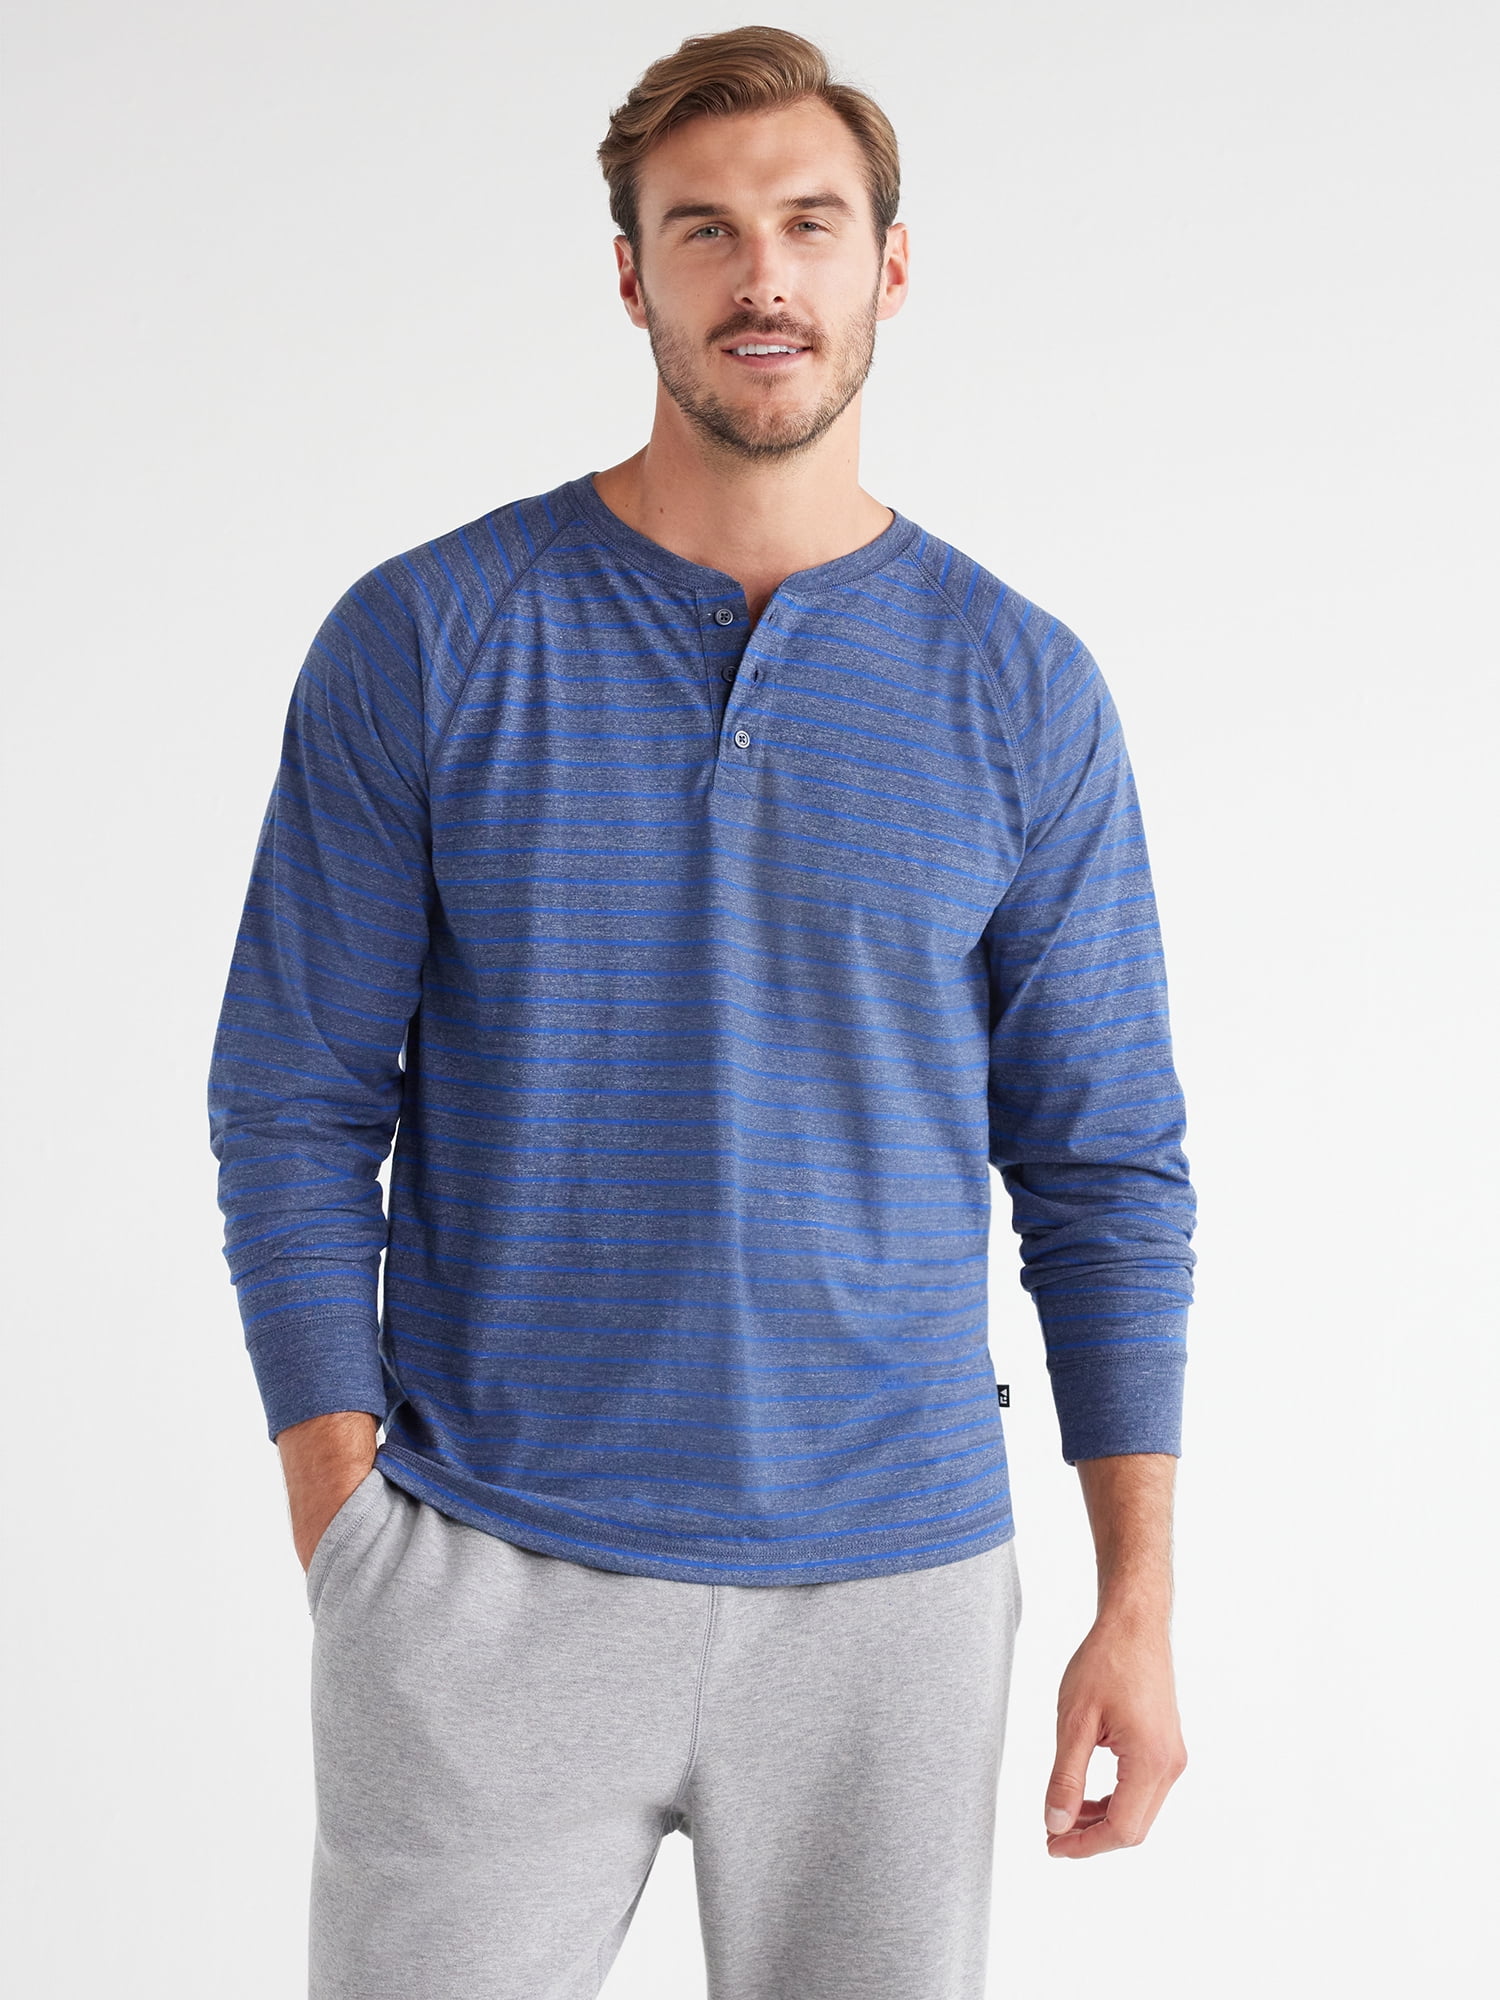 Explore Cozy Style with Long Sleeve Henleys: Your Simple Guide